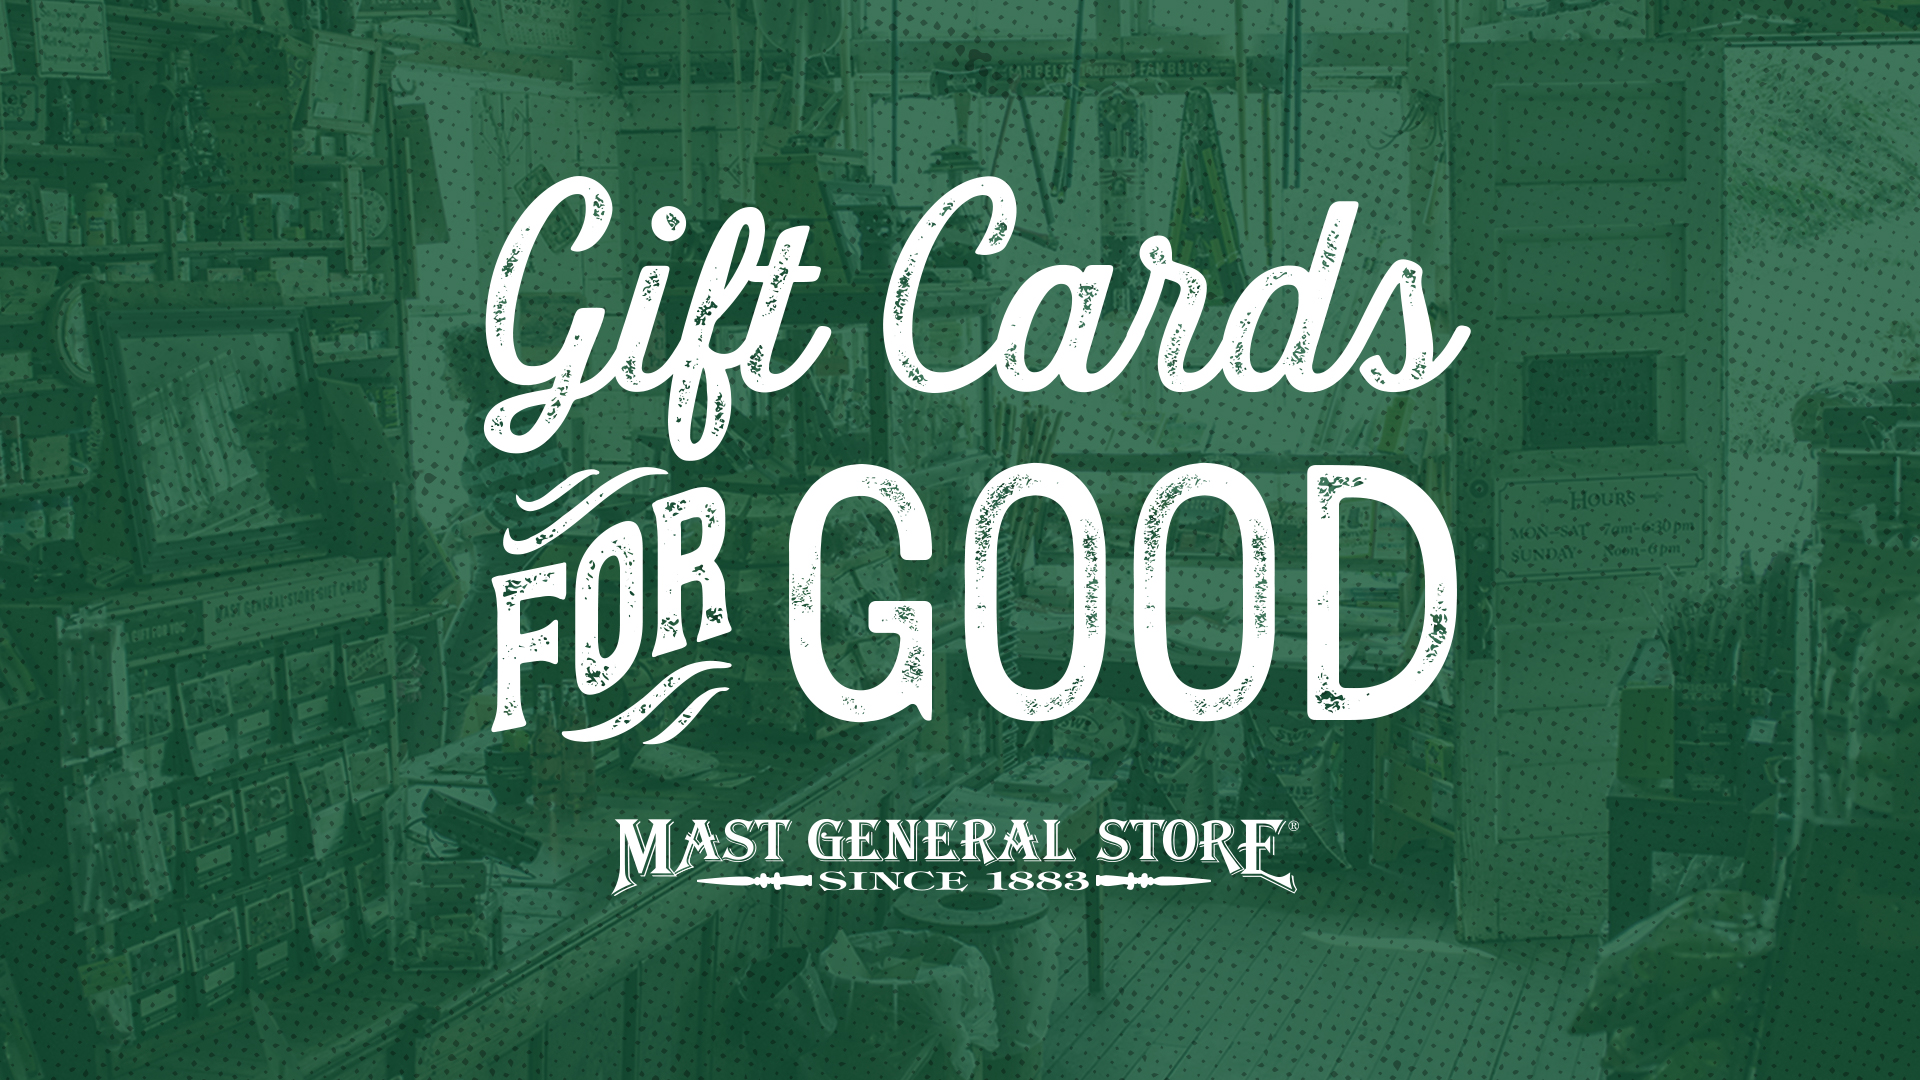 Introducing Gift Cards for Good